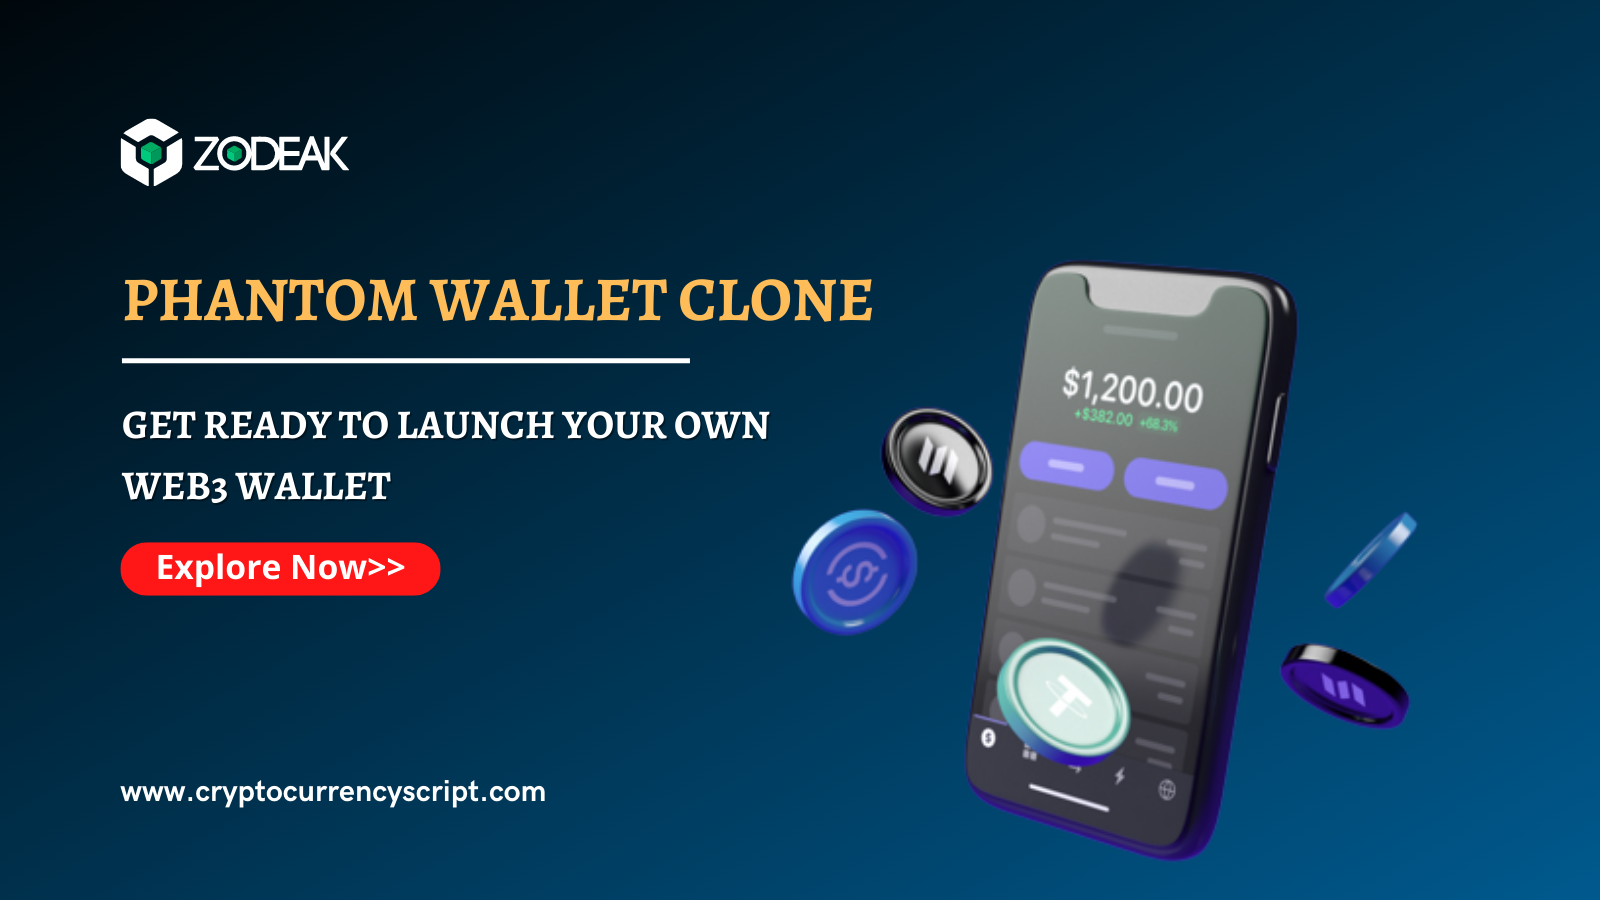 Get Ready To Launch your Own Web3 Wallet like a Phantom